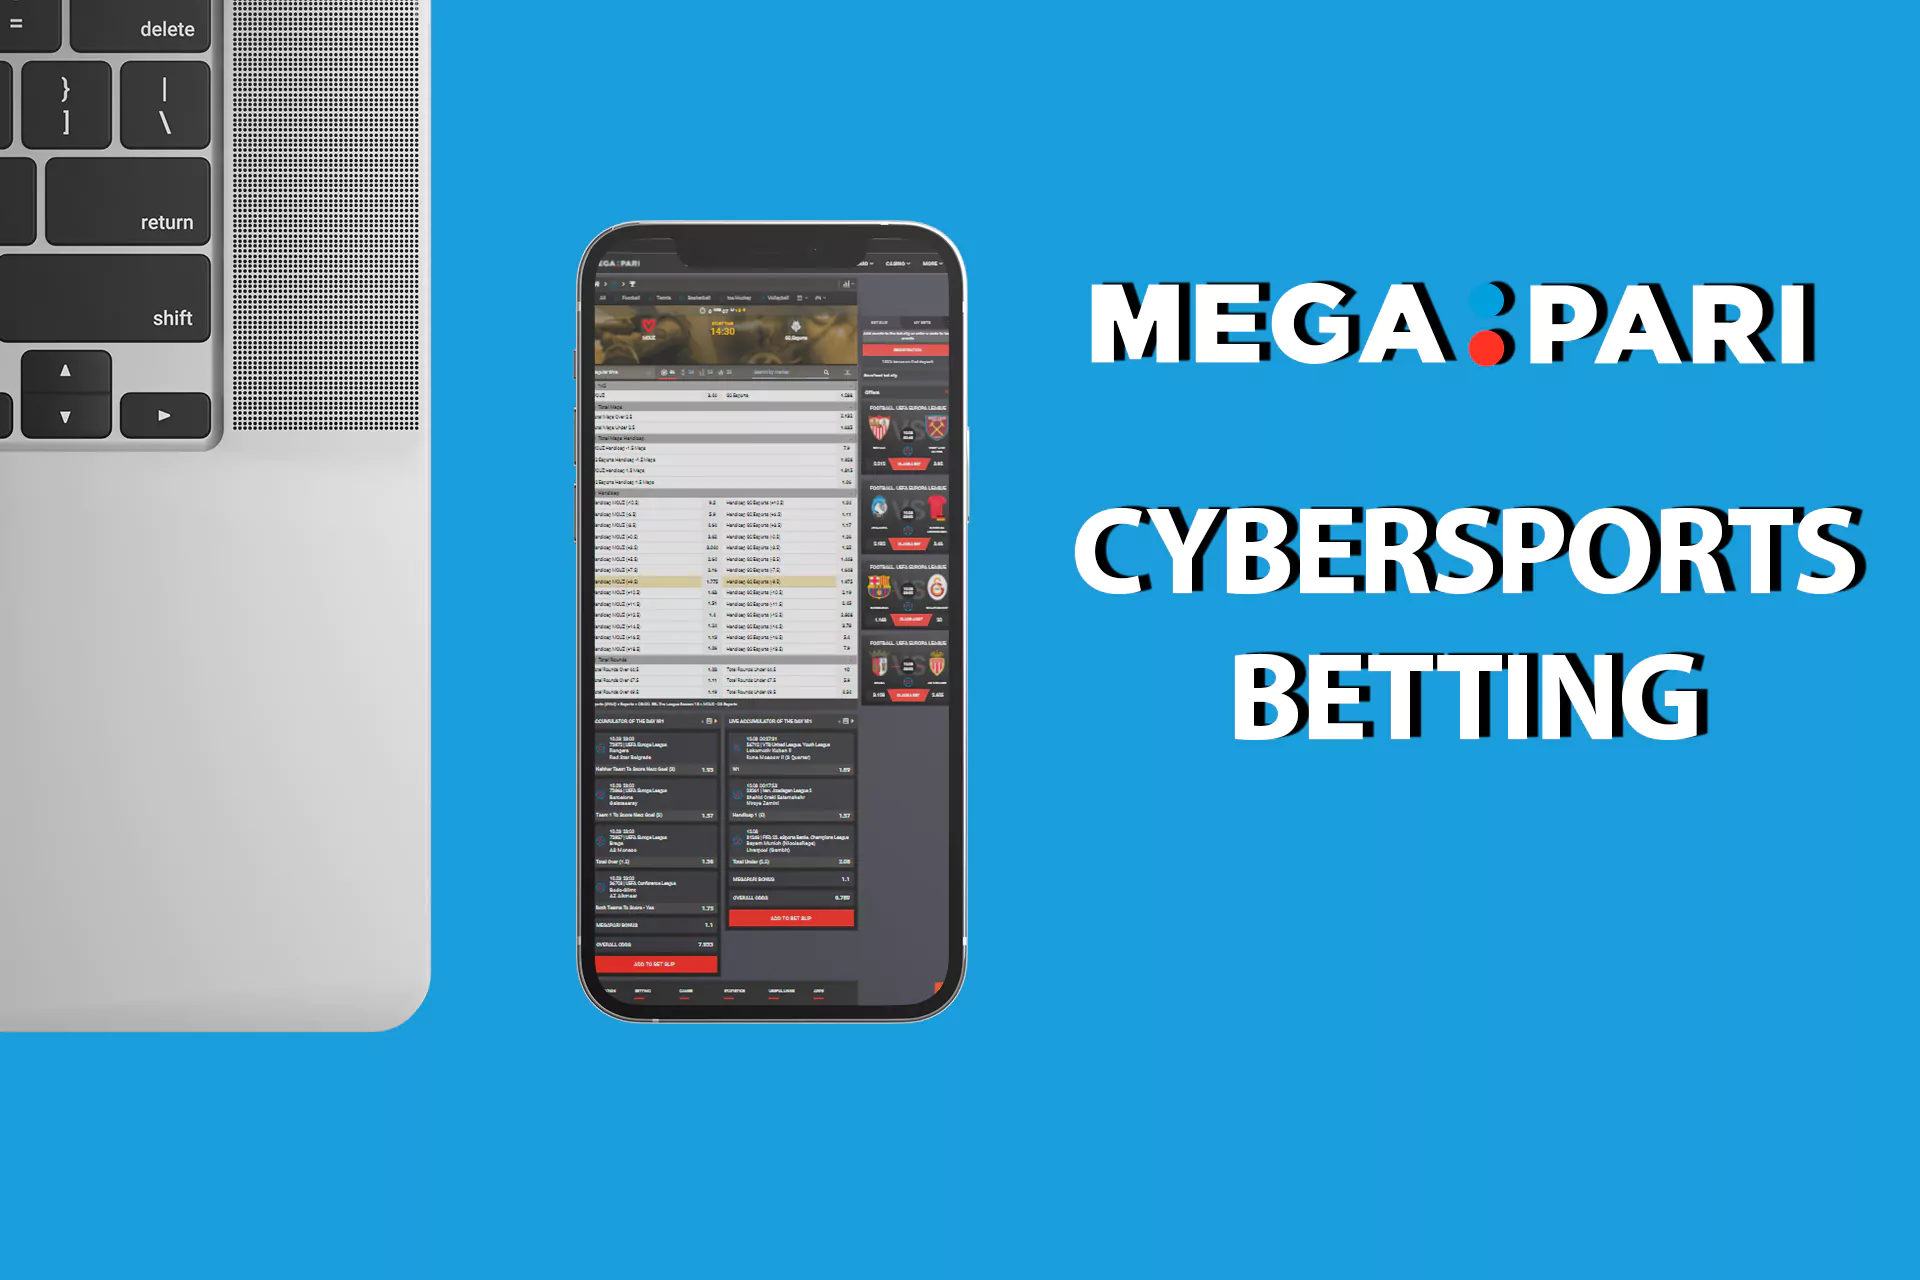 YOu can watch live streamings and bet on cybersports in the app.